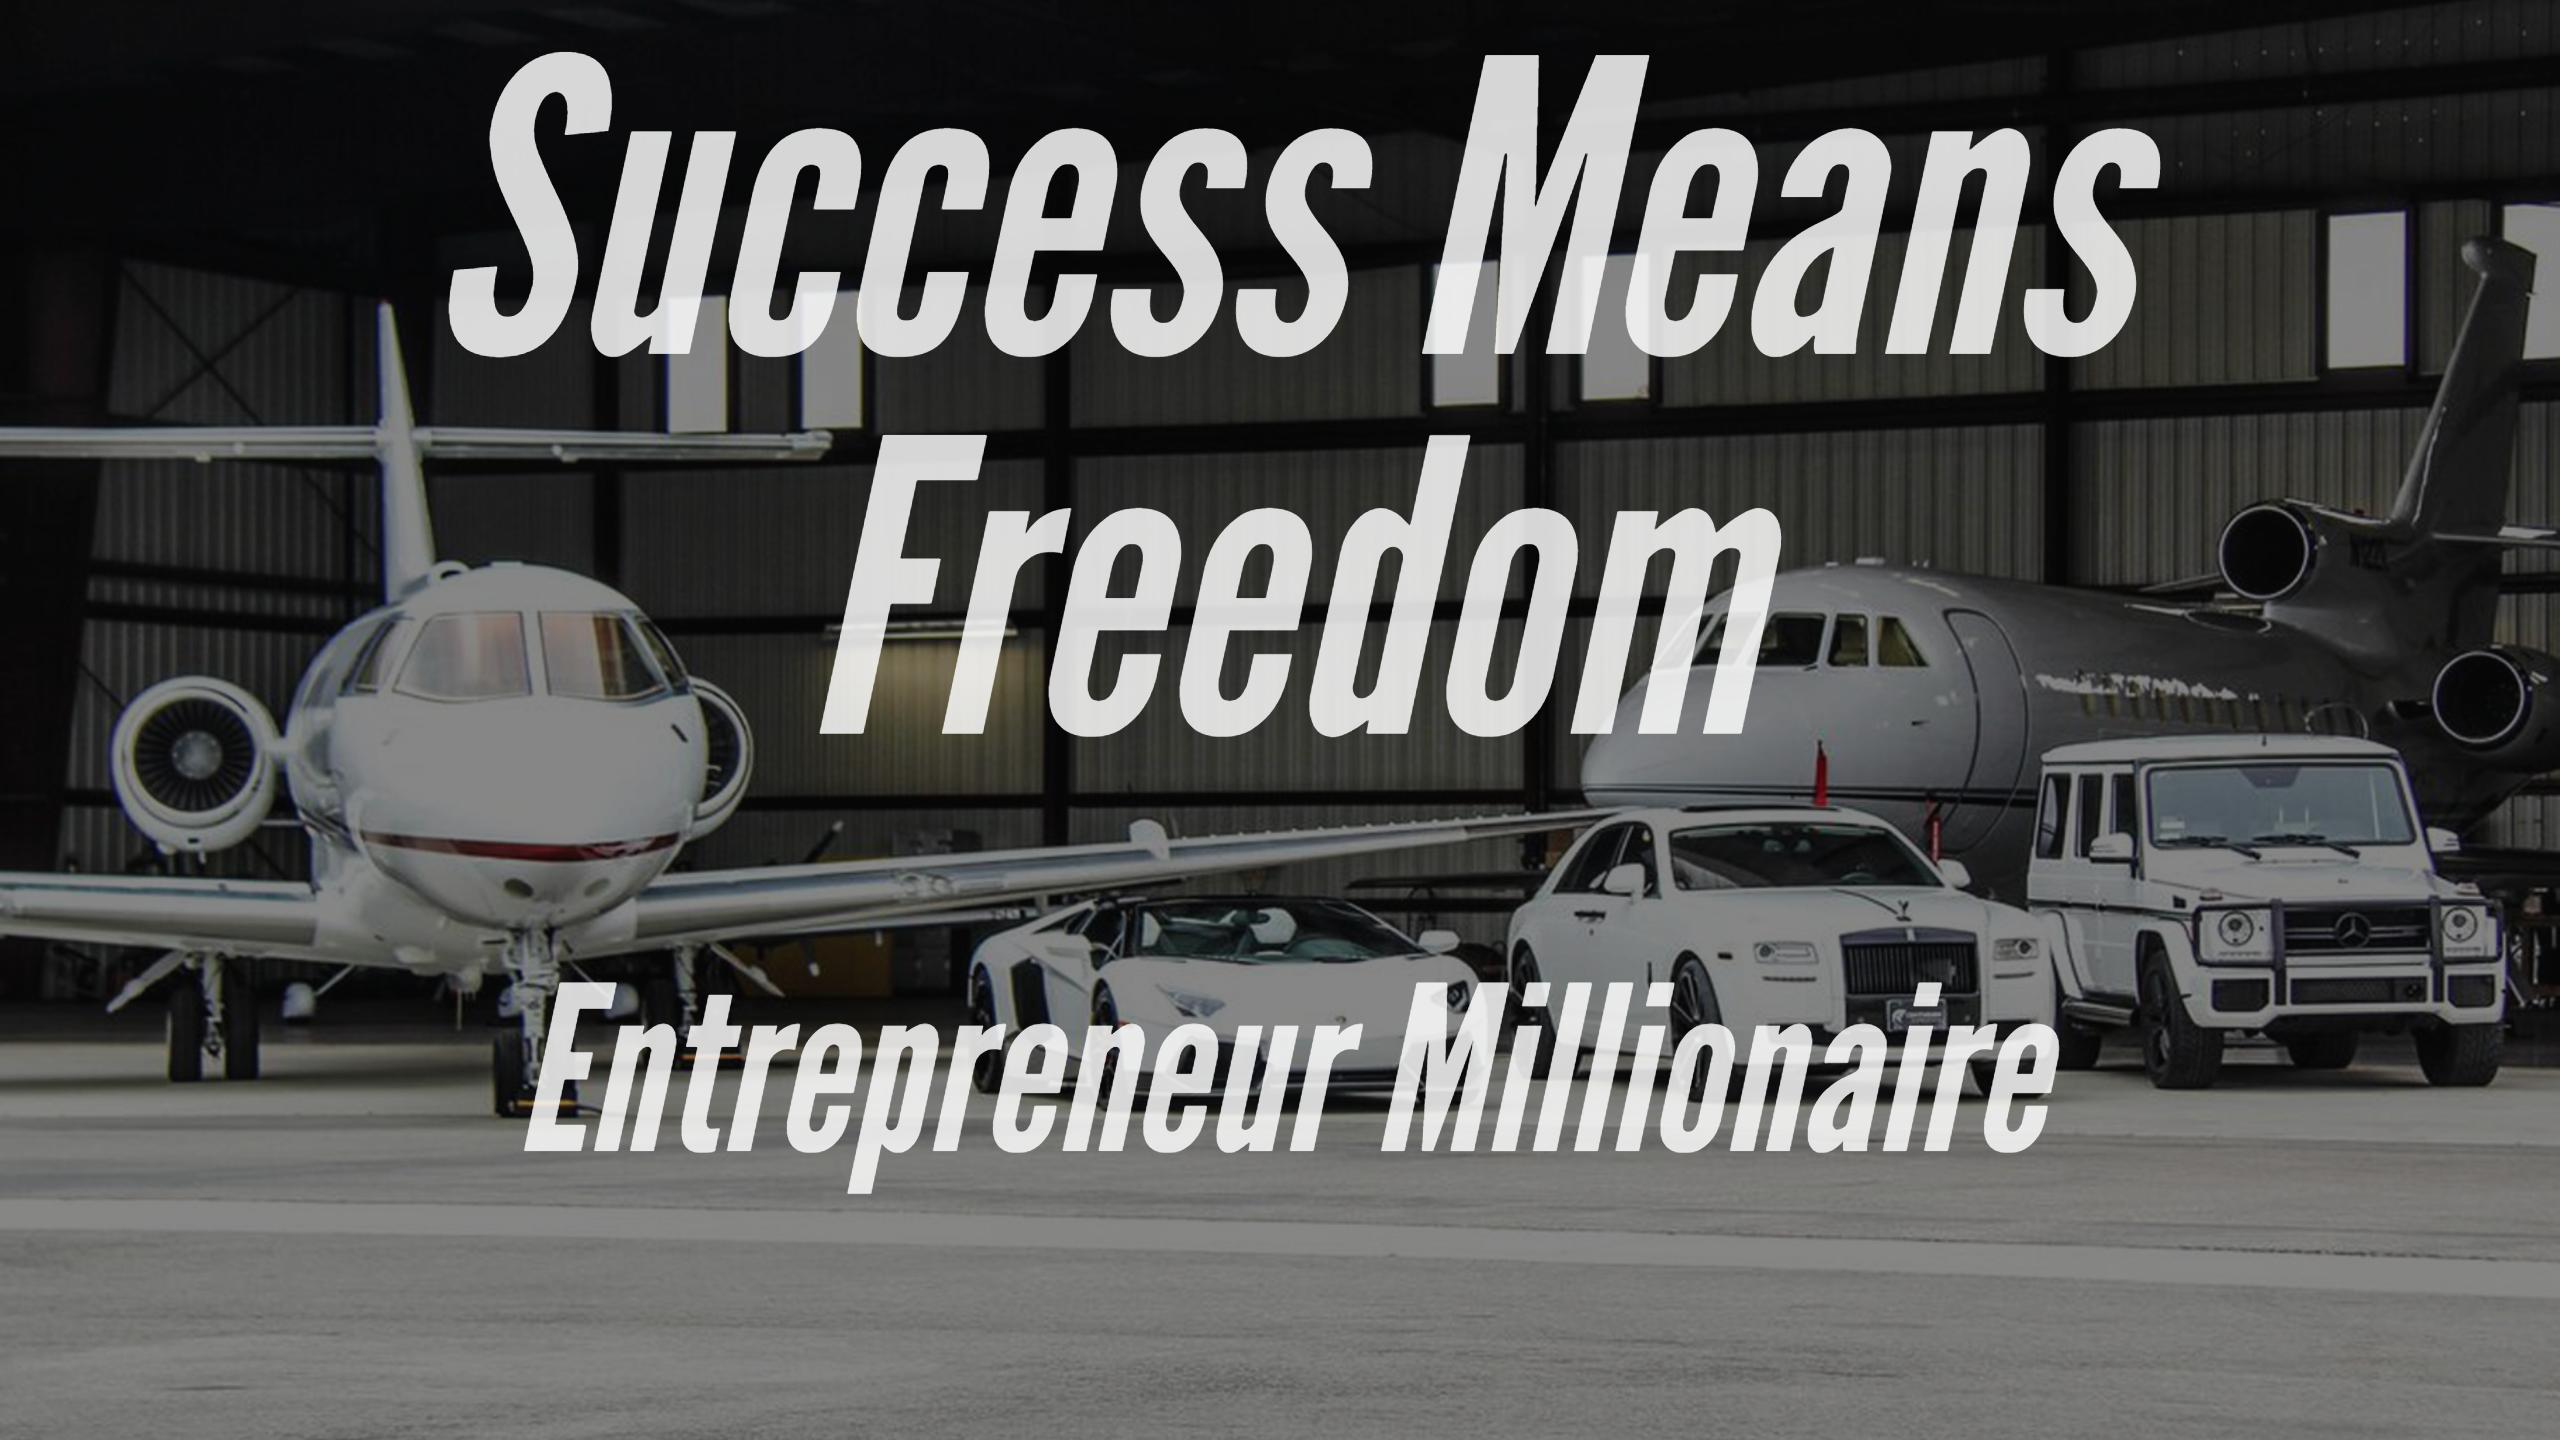 Success Means Freedom